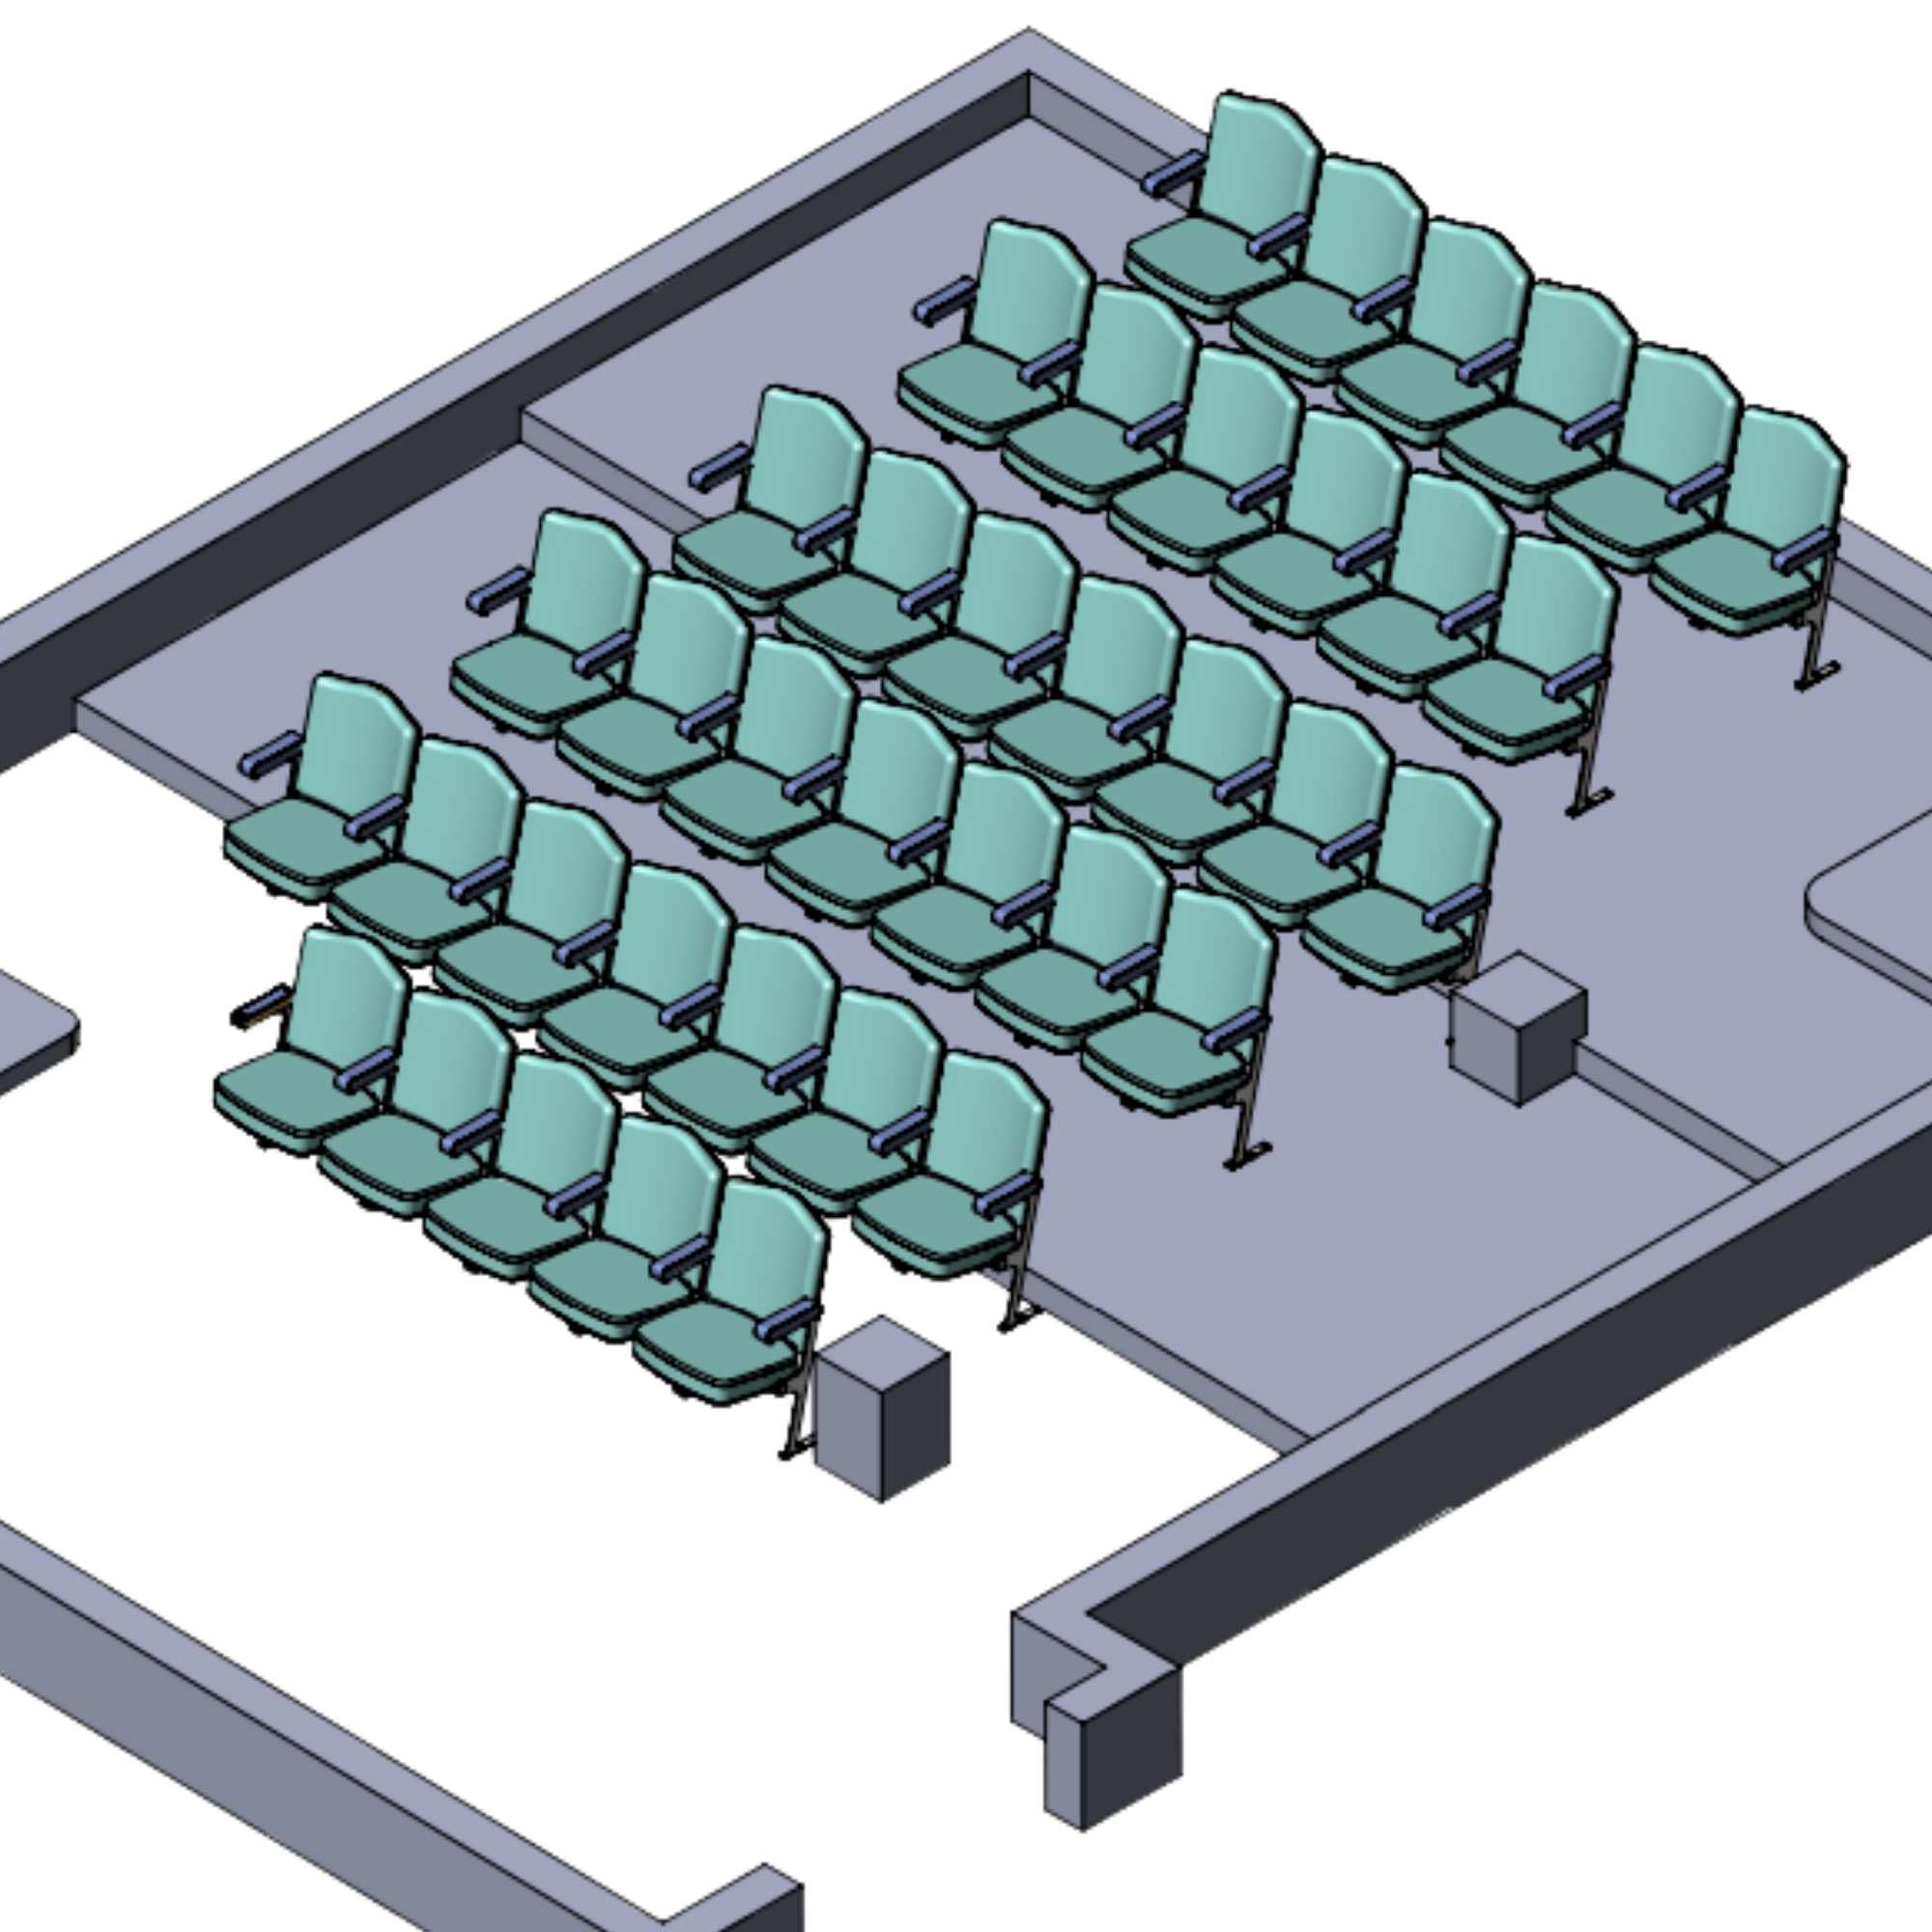 Render of a venue layout using Chavenag